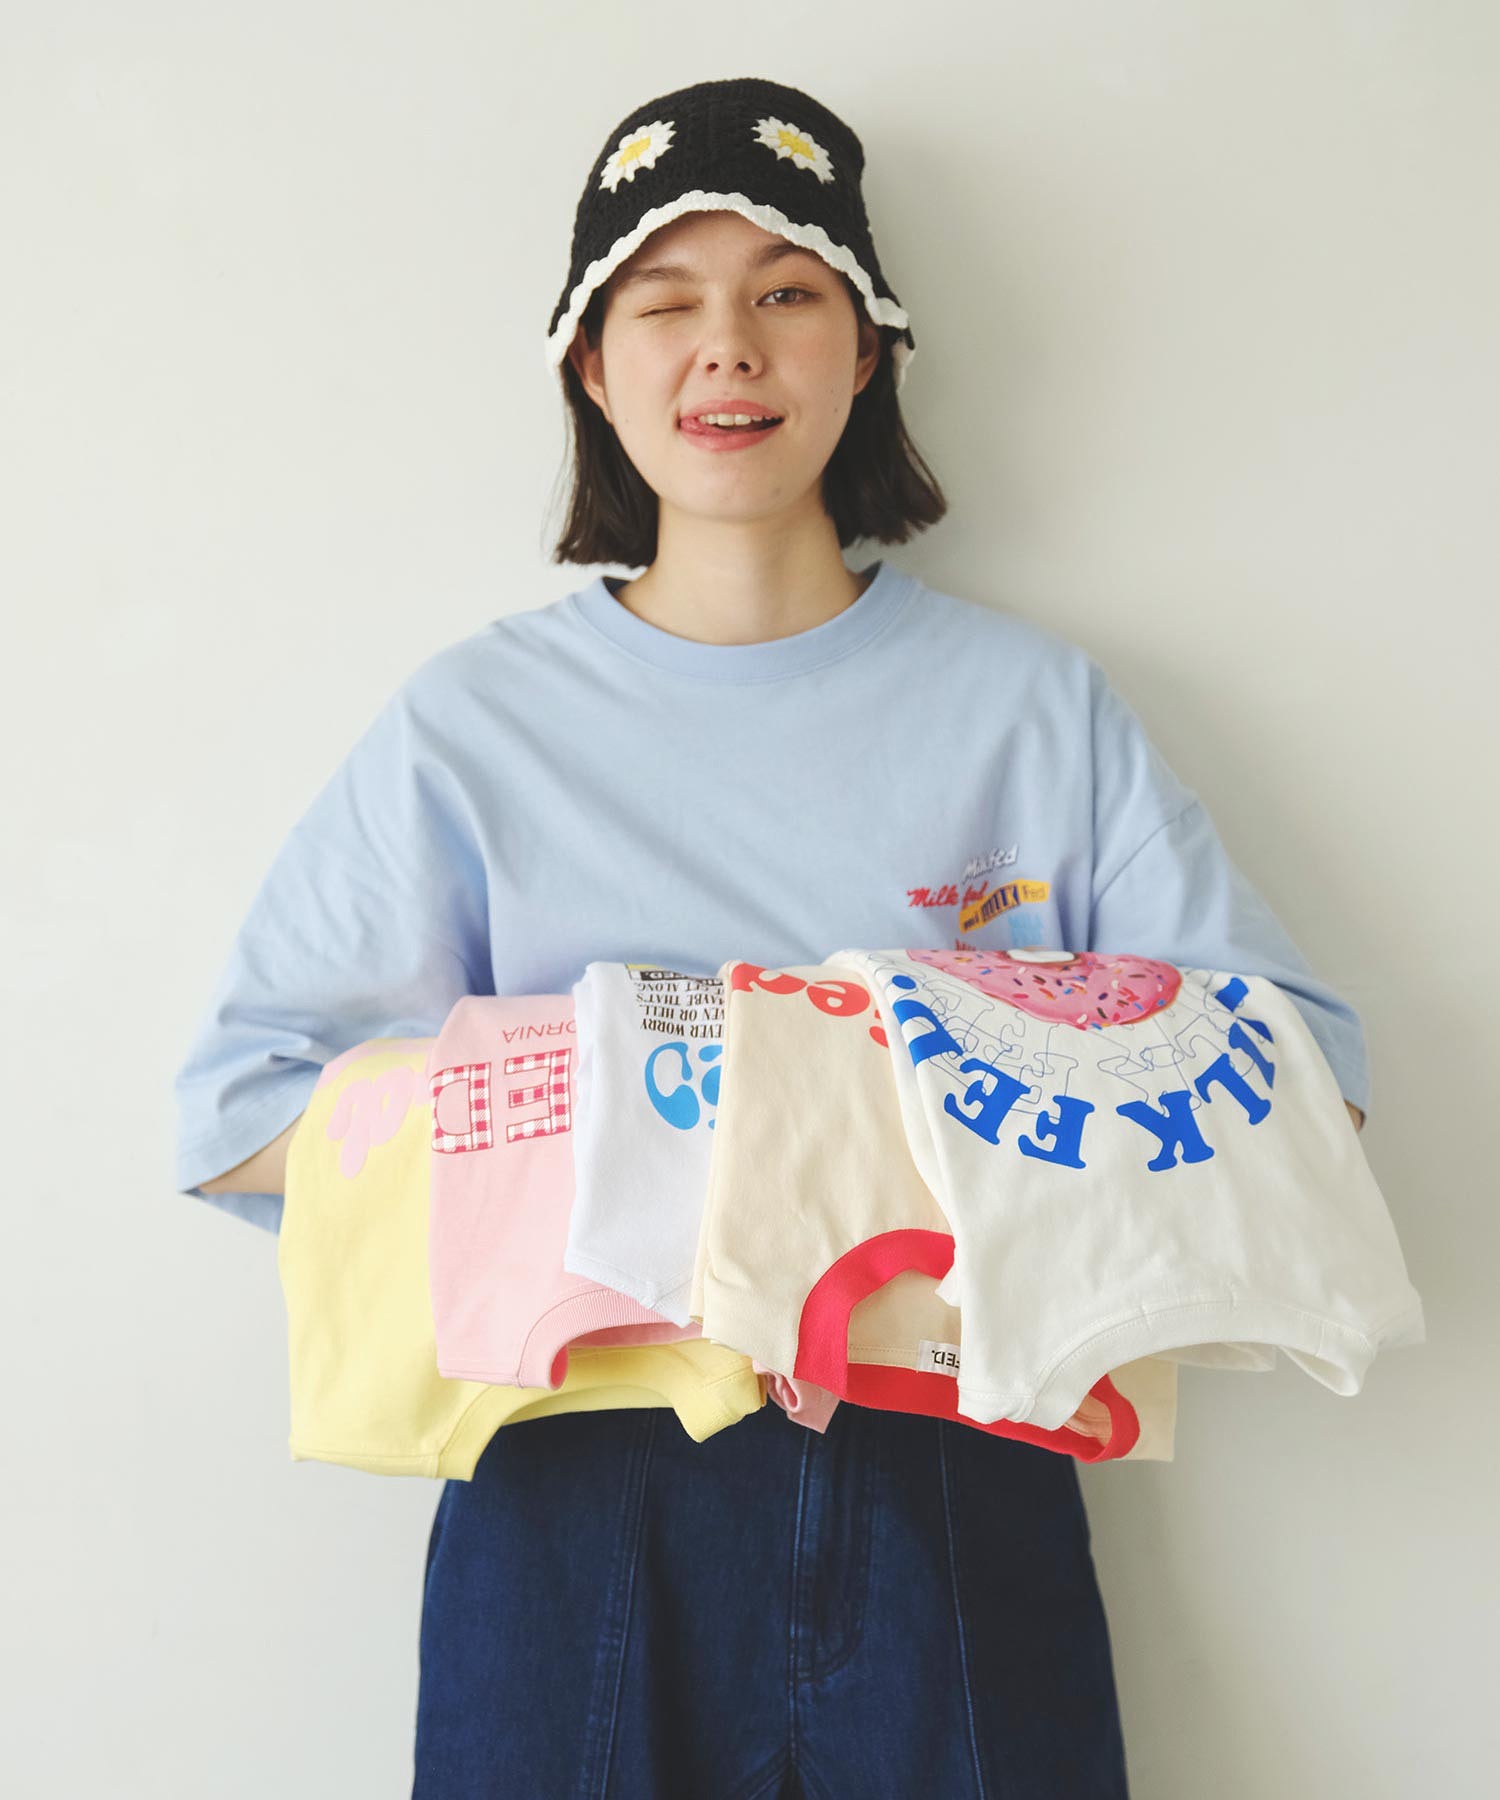 ROUND DONUTS WIDE S/S TEE